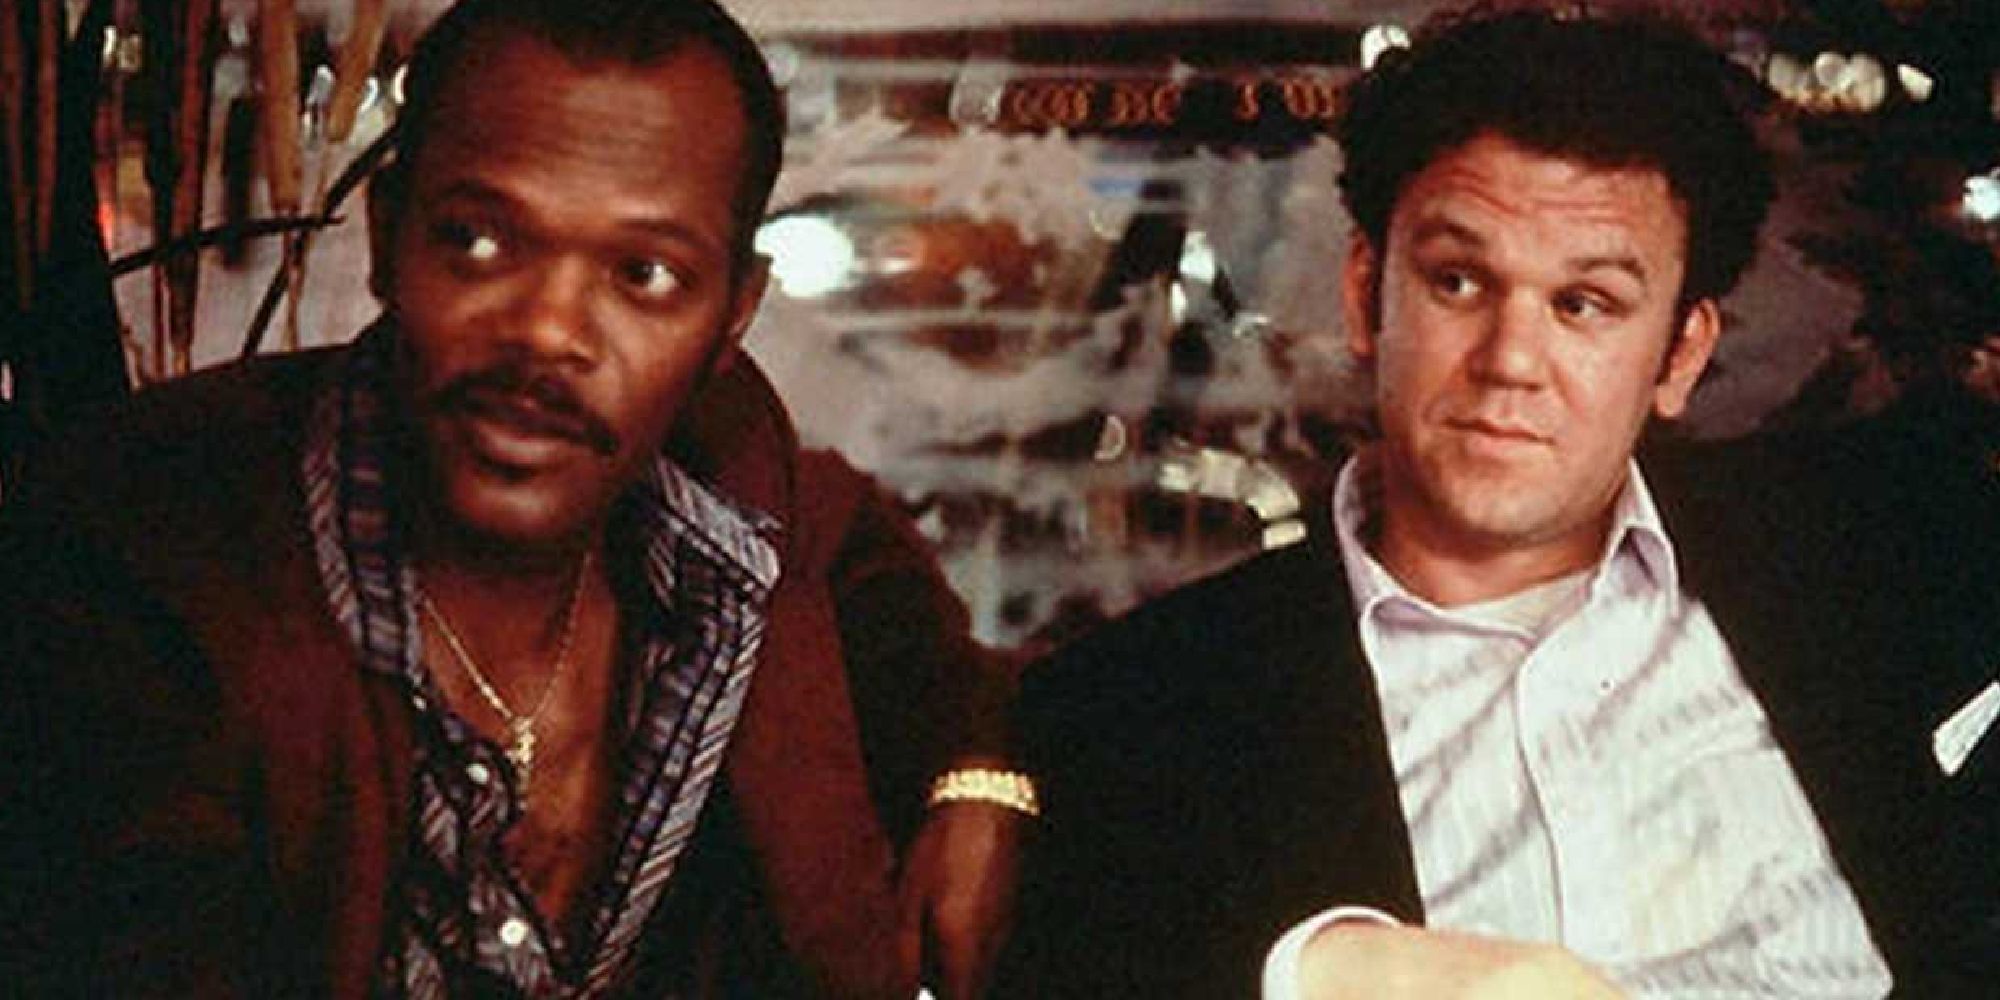 John C. Reilly and Samuel L. Jackson sitting in a bar in Hard Eight